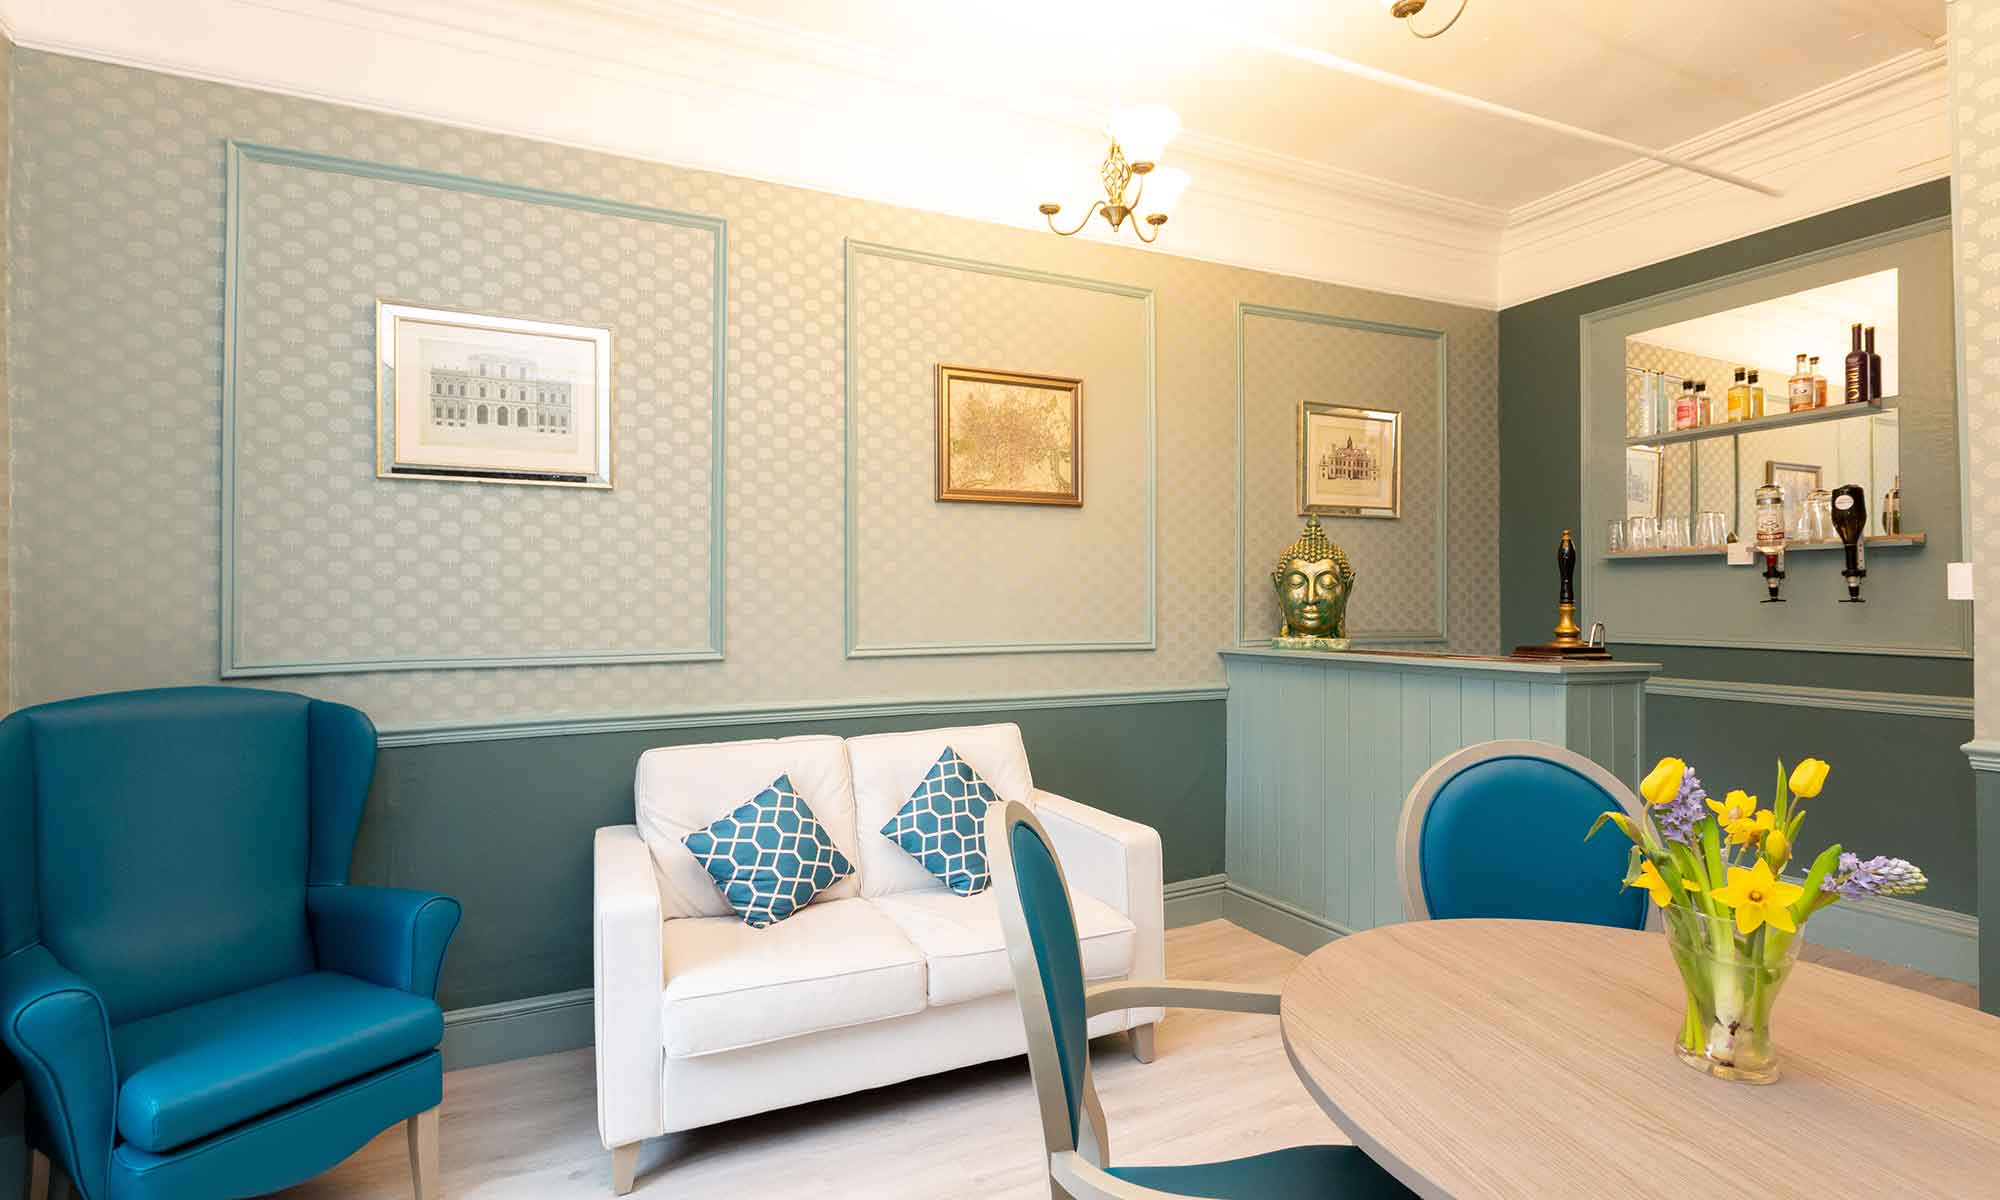 Bar area at Newton House Care Home showing Shackletons sofa and chairs.